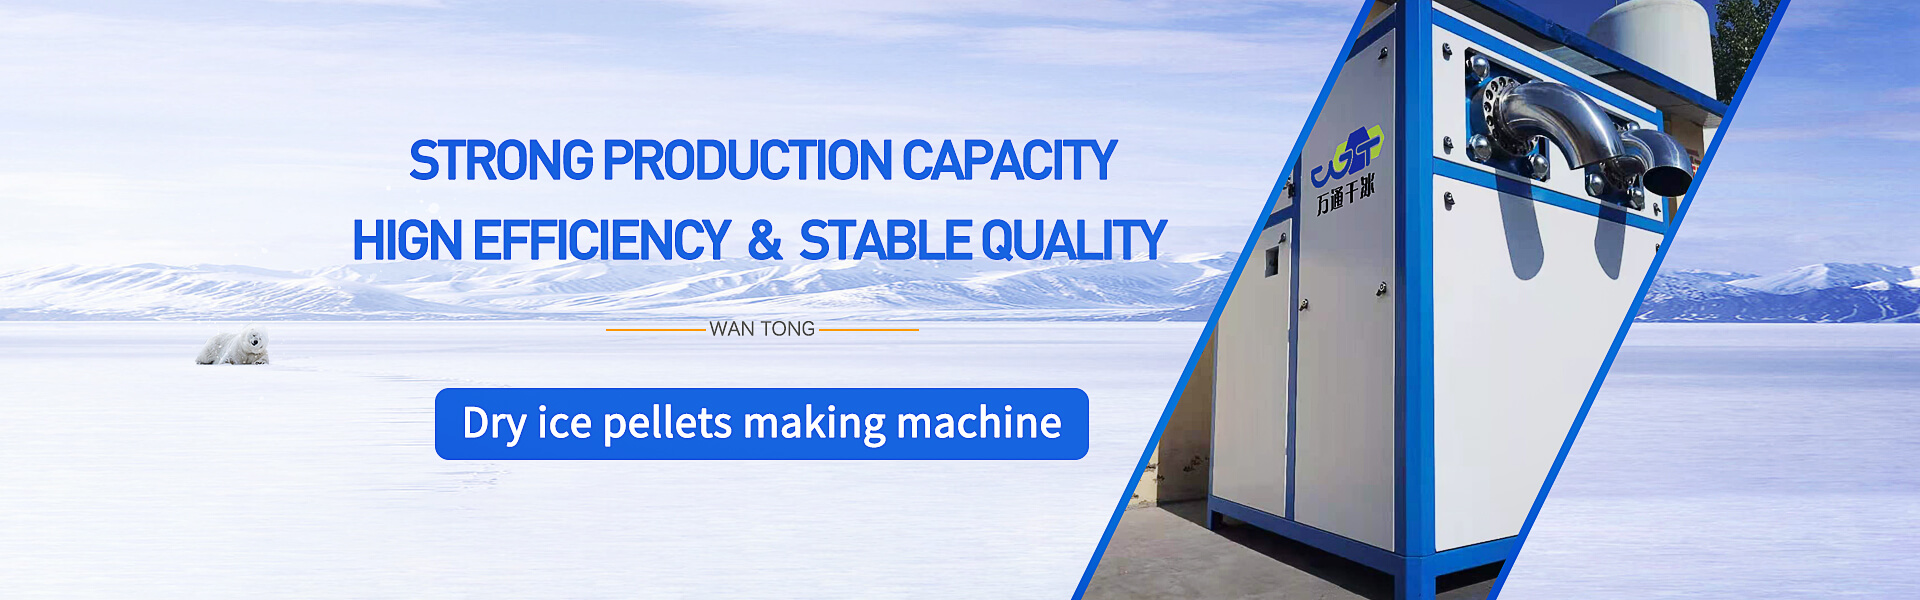 3-Strong Production Capacity High Efficiency